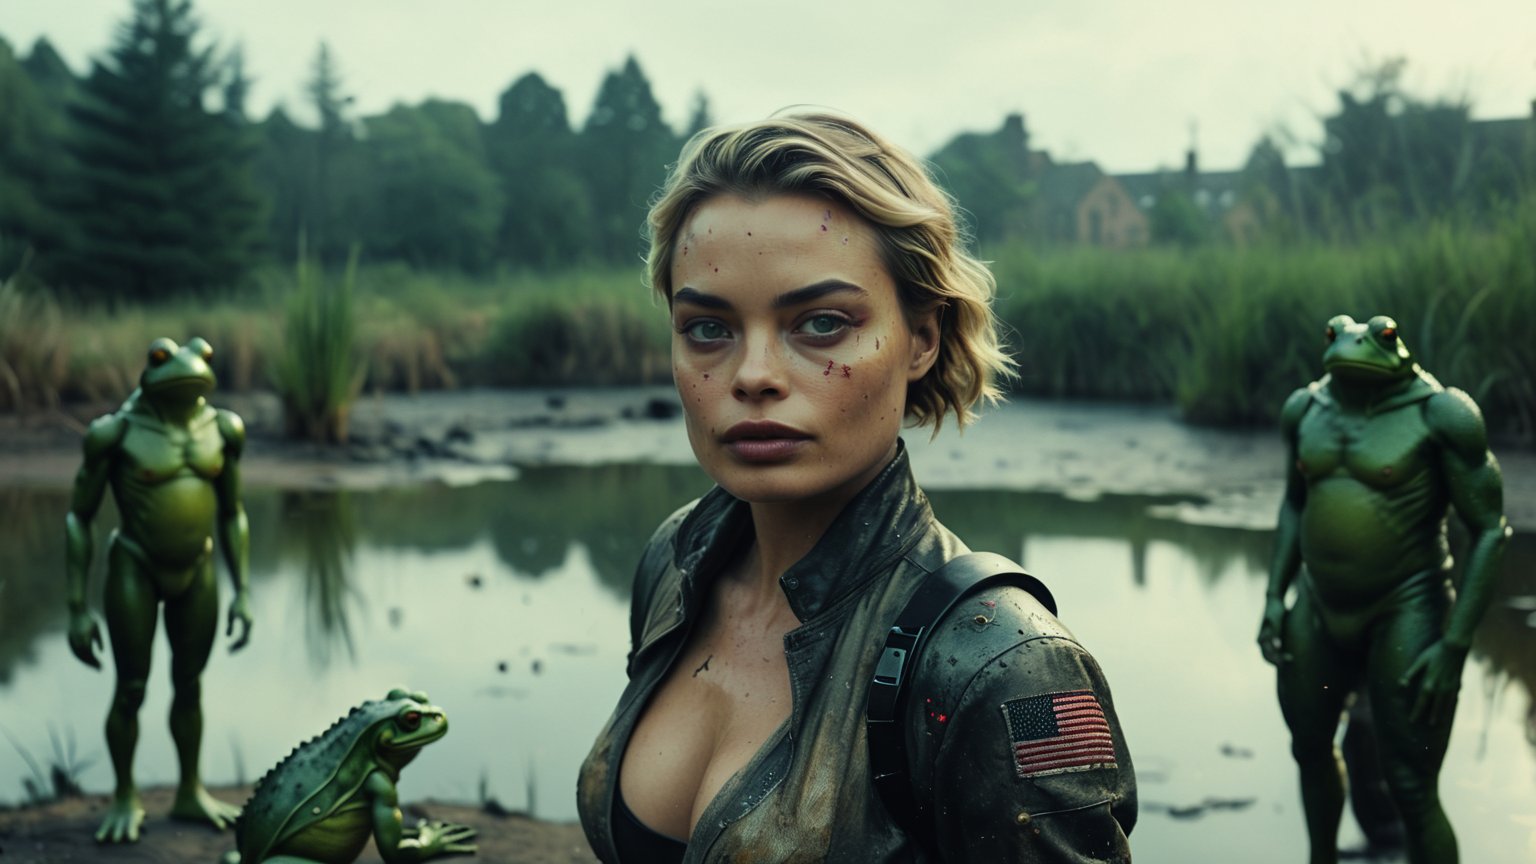 (((sexy cyberpunk android Margot Robbie stands near a pond with green acid and huge mutant frogs))), ((vintage dystopian cyberpunk wasteland background)), ((lighting dust particles)), horror movie scene, best quality, masterpiece, (photorealistic:1.4), 8k uhd, dslr, masterpiece photoshoot, (in the style of Hans Heysen and Carne Griffiths),shot on Canon EOS 5D Mark IV DSLR, 85mm lens, long exposure time, f/8, ISO 100, shutter speed 1/125, award winning photograph, facing camera, perfect contrast,cinematic style